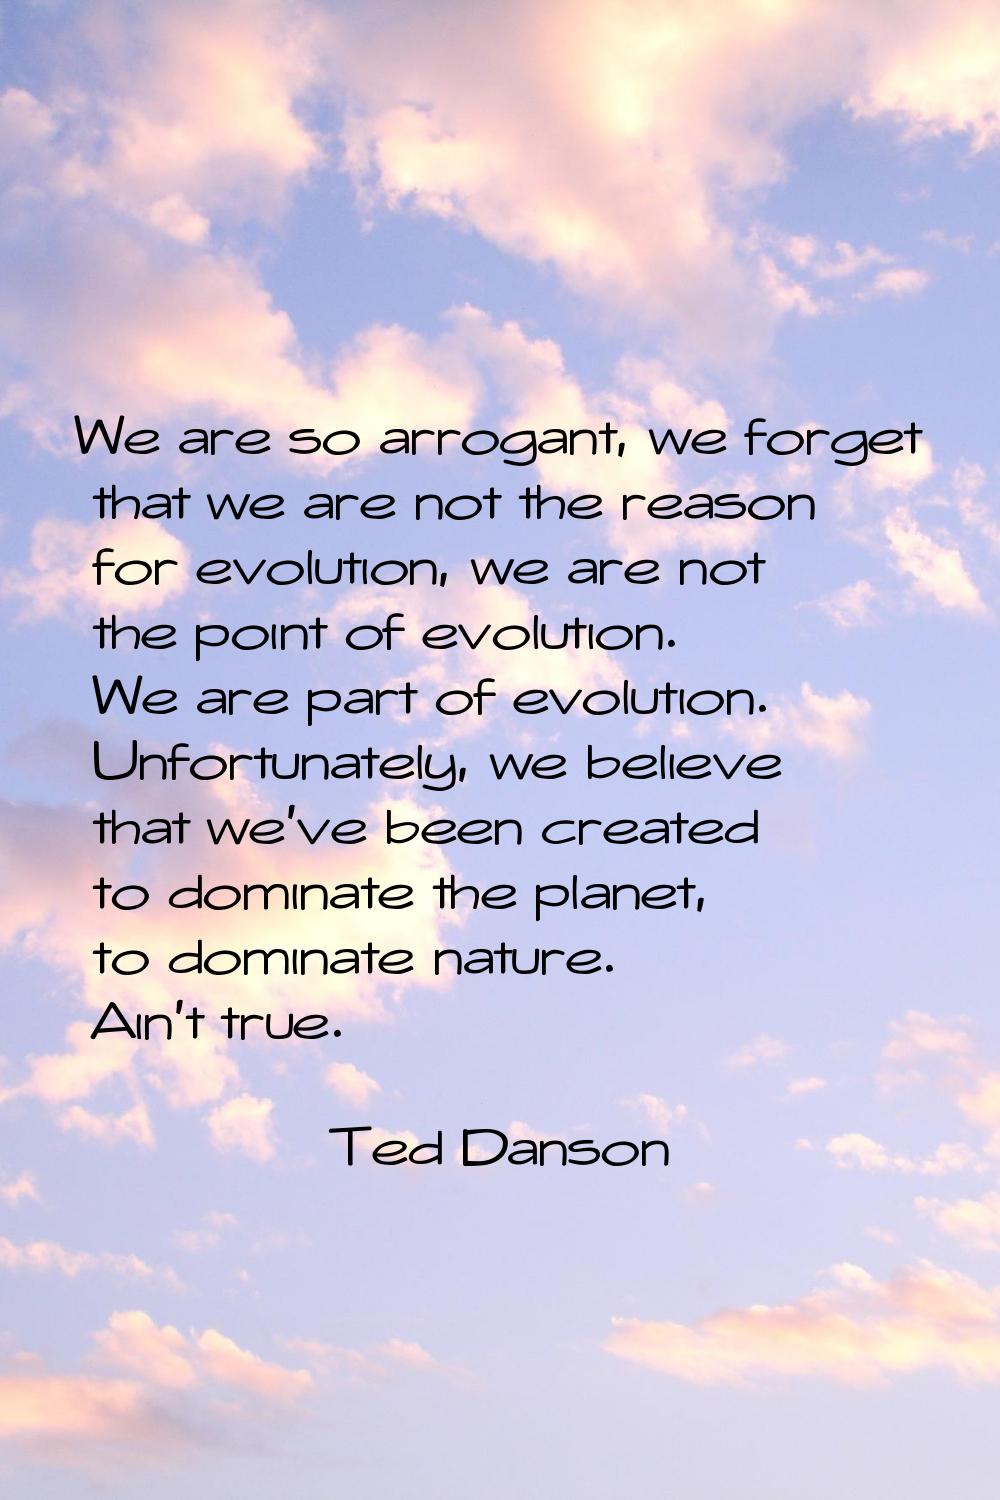 We are so arrogant, we forget that we are not the reason for evolution, we are not the point of evo